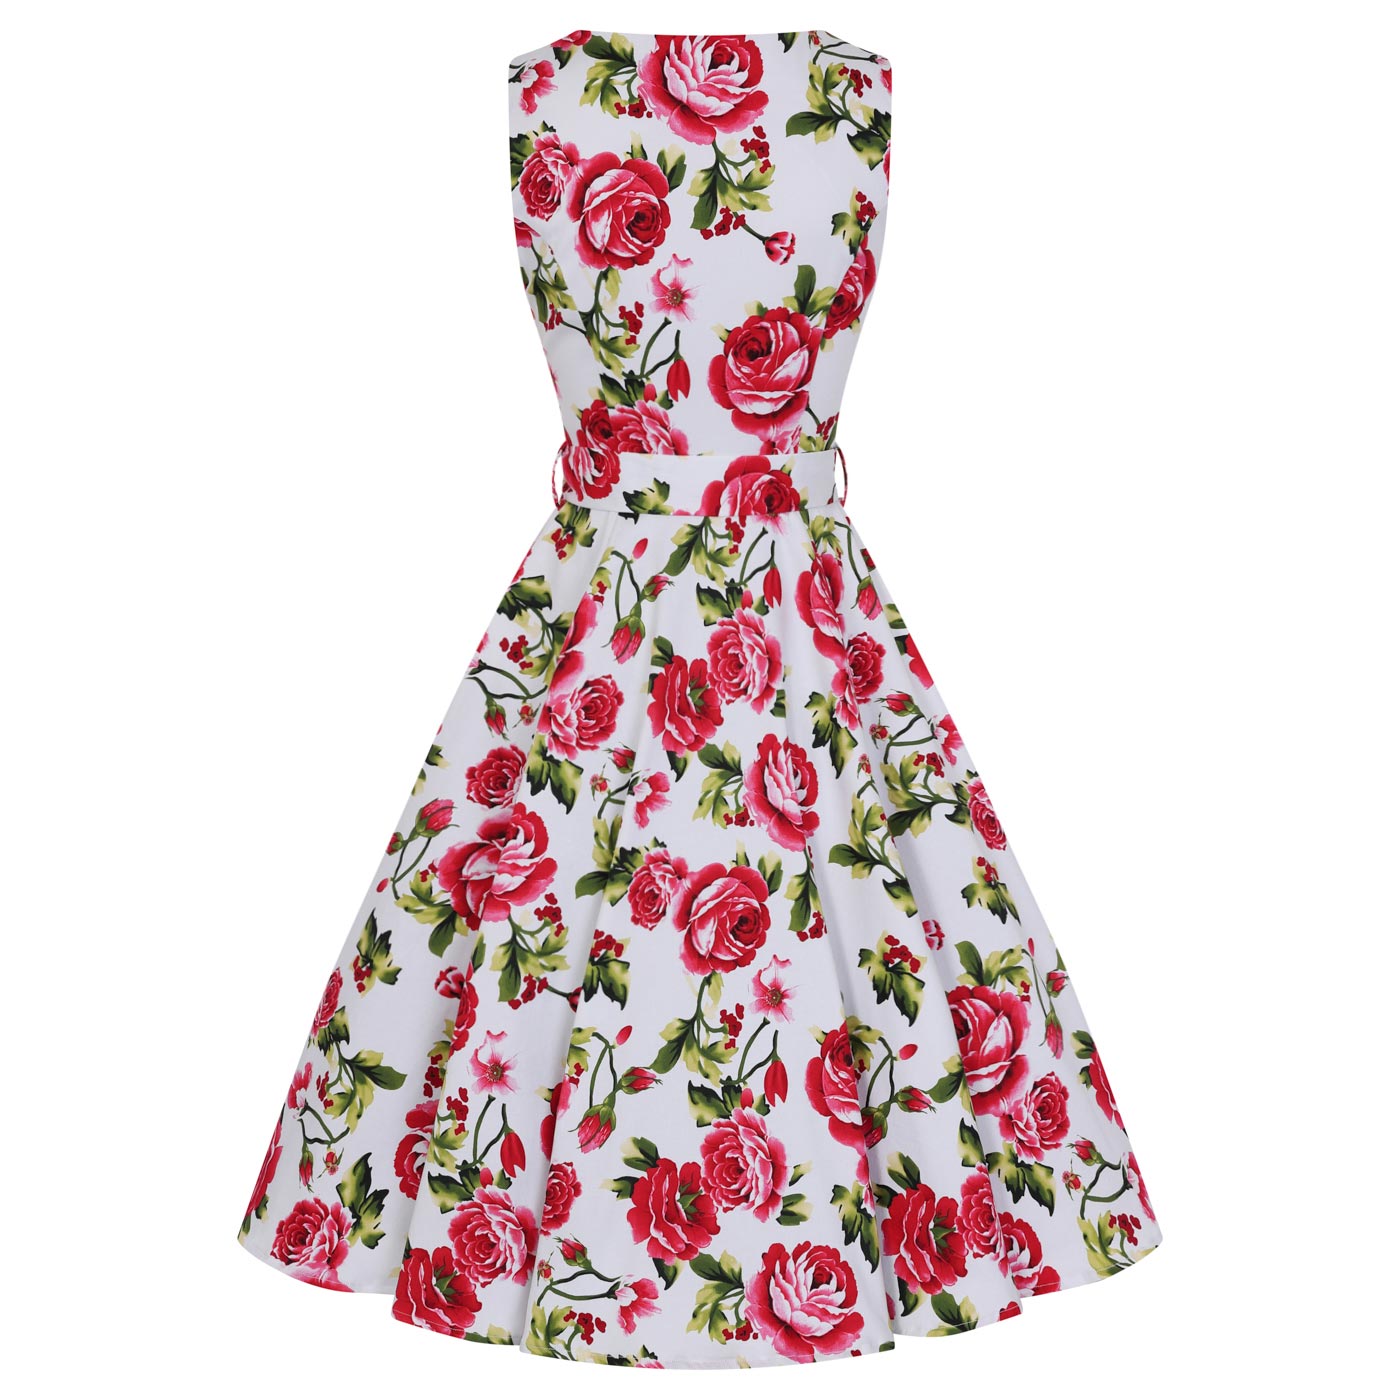 White and Pink Rose Floral Print Audrey 50s Summer Swing Dress - Pretty Kitty Fashion